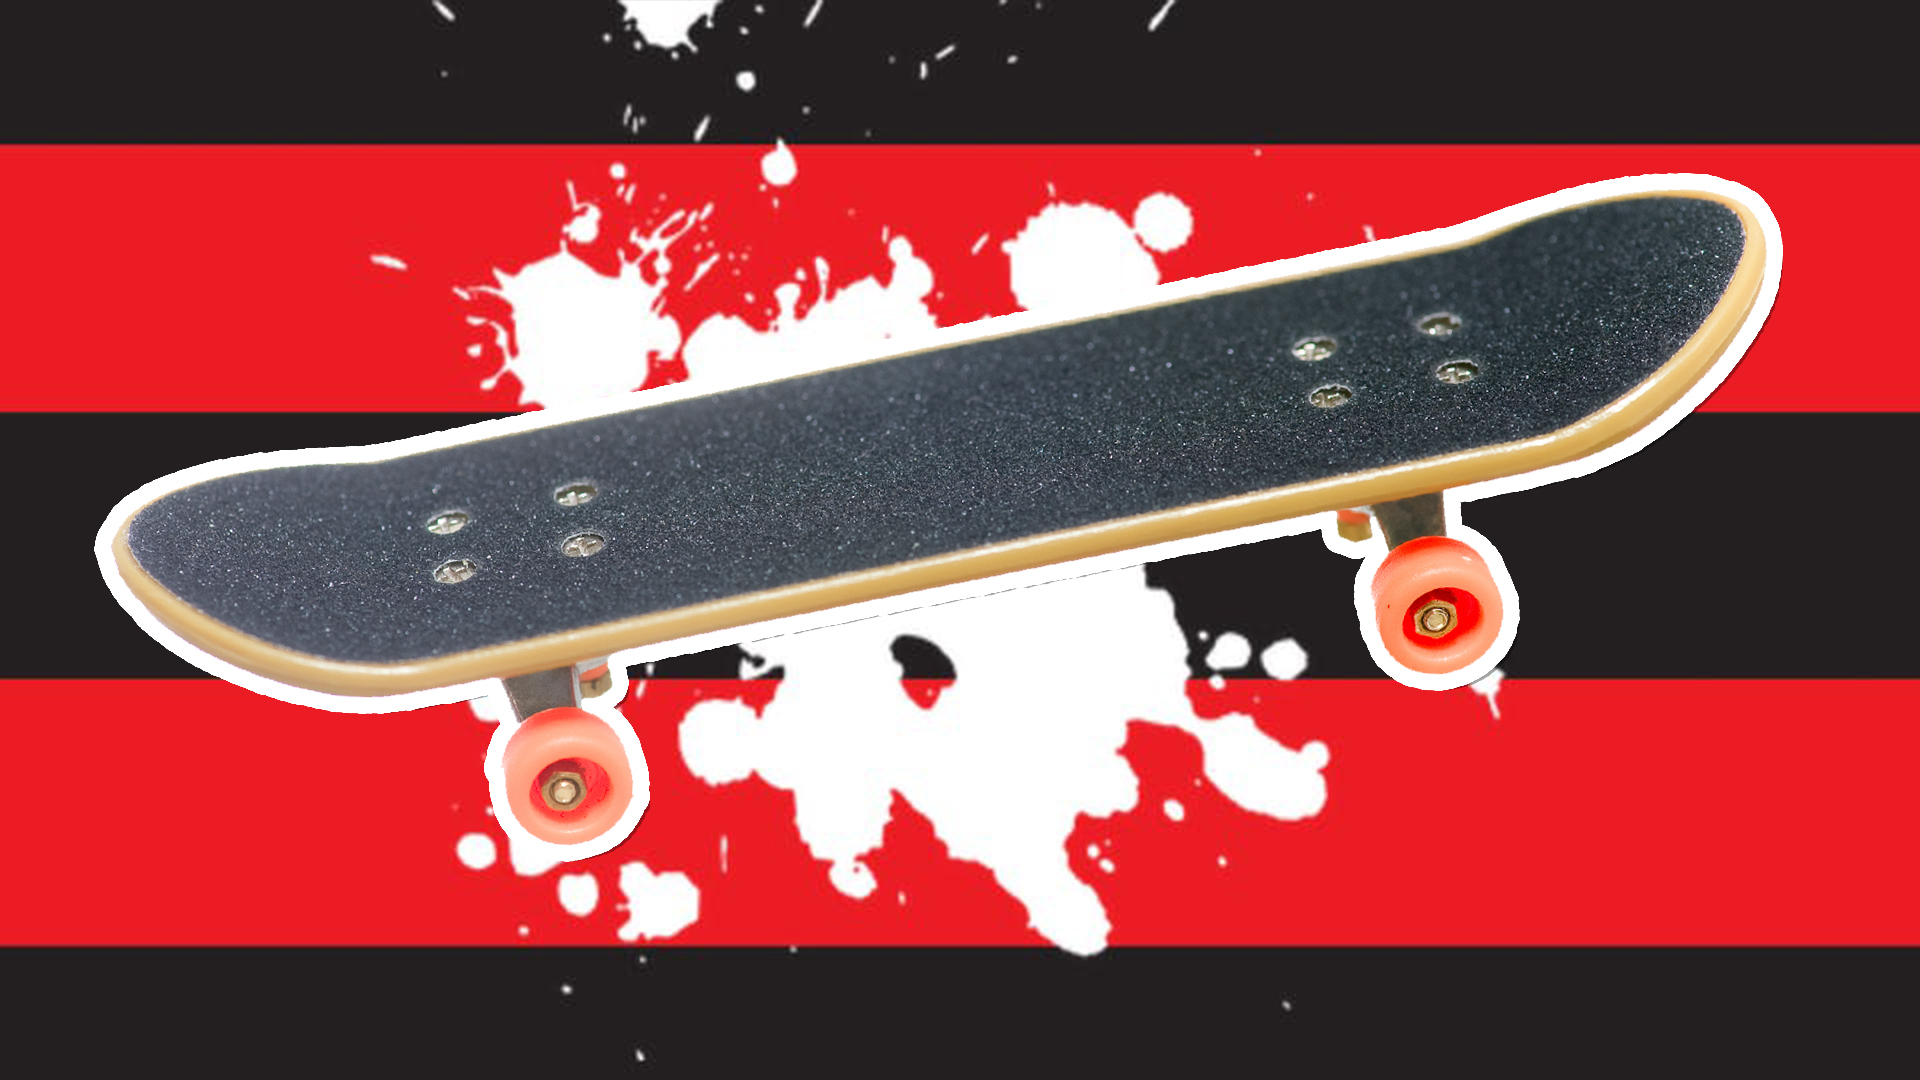 A skateboard on a red and black striped background